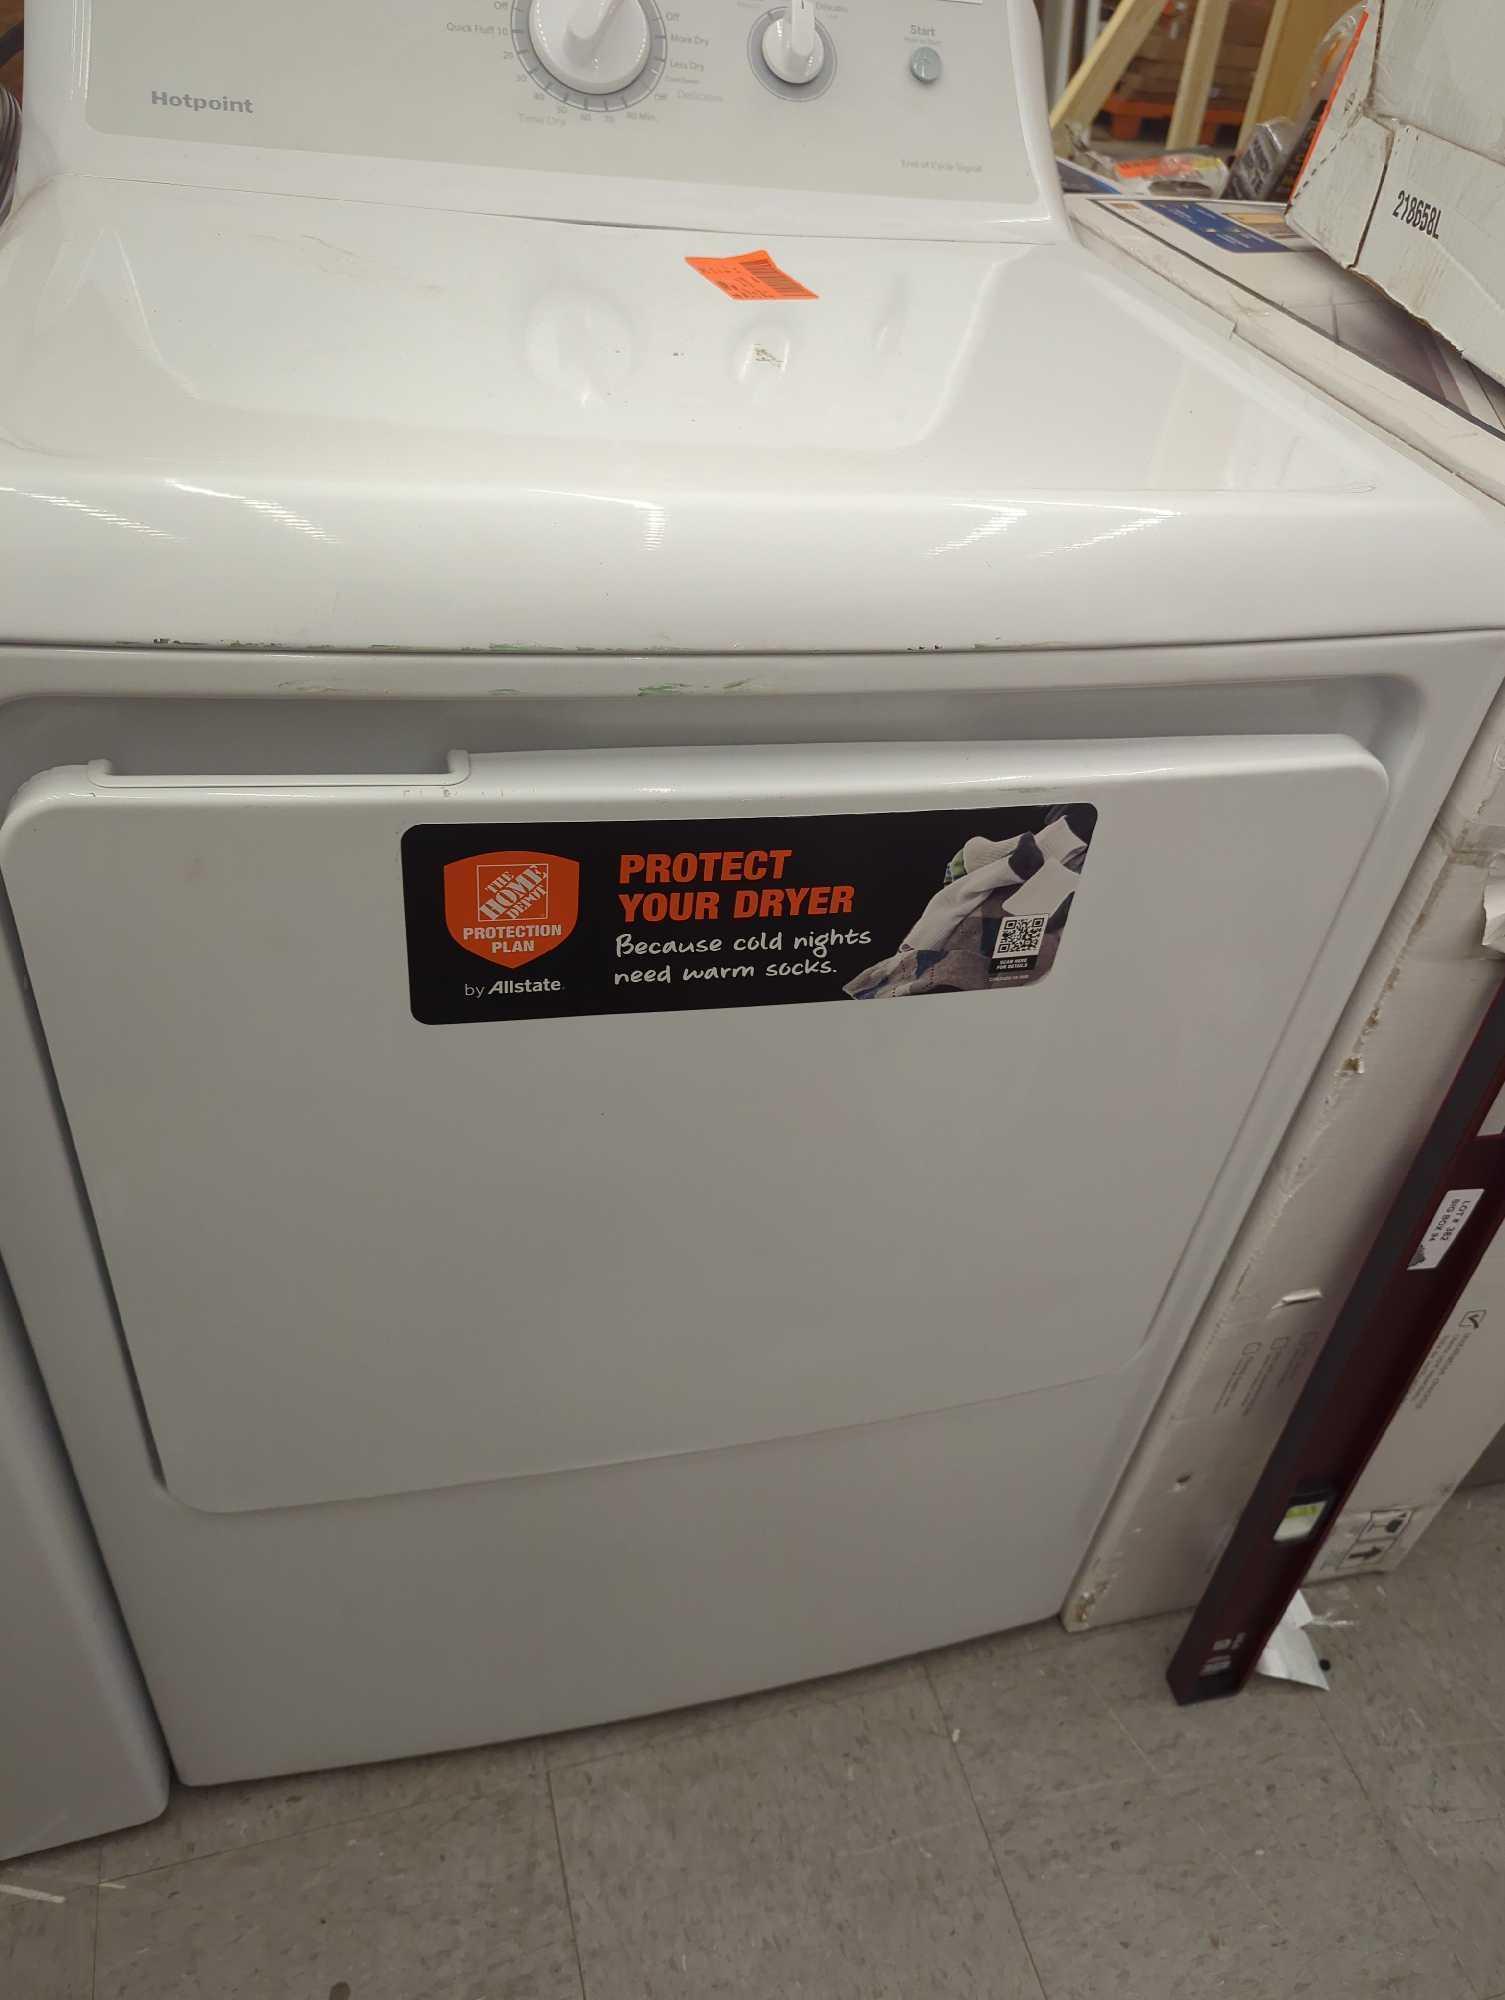 Hotpoint 6.2 cu. ft. vented Gas Dryer in White with Auto Dry, Appears to be Used Has Some Minor